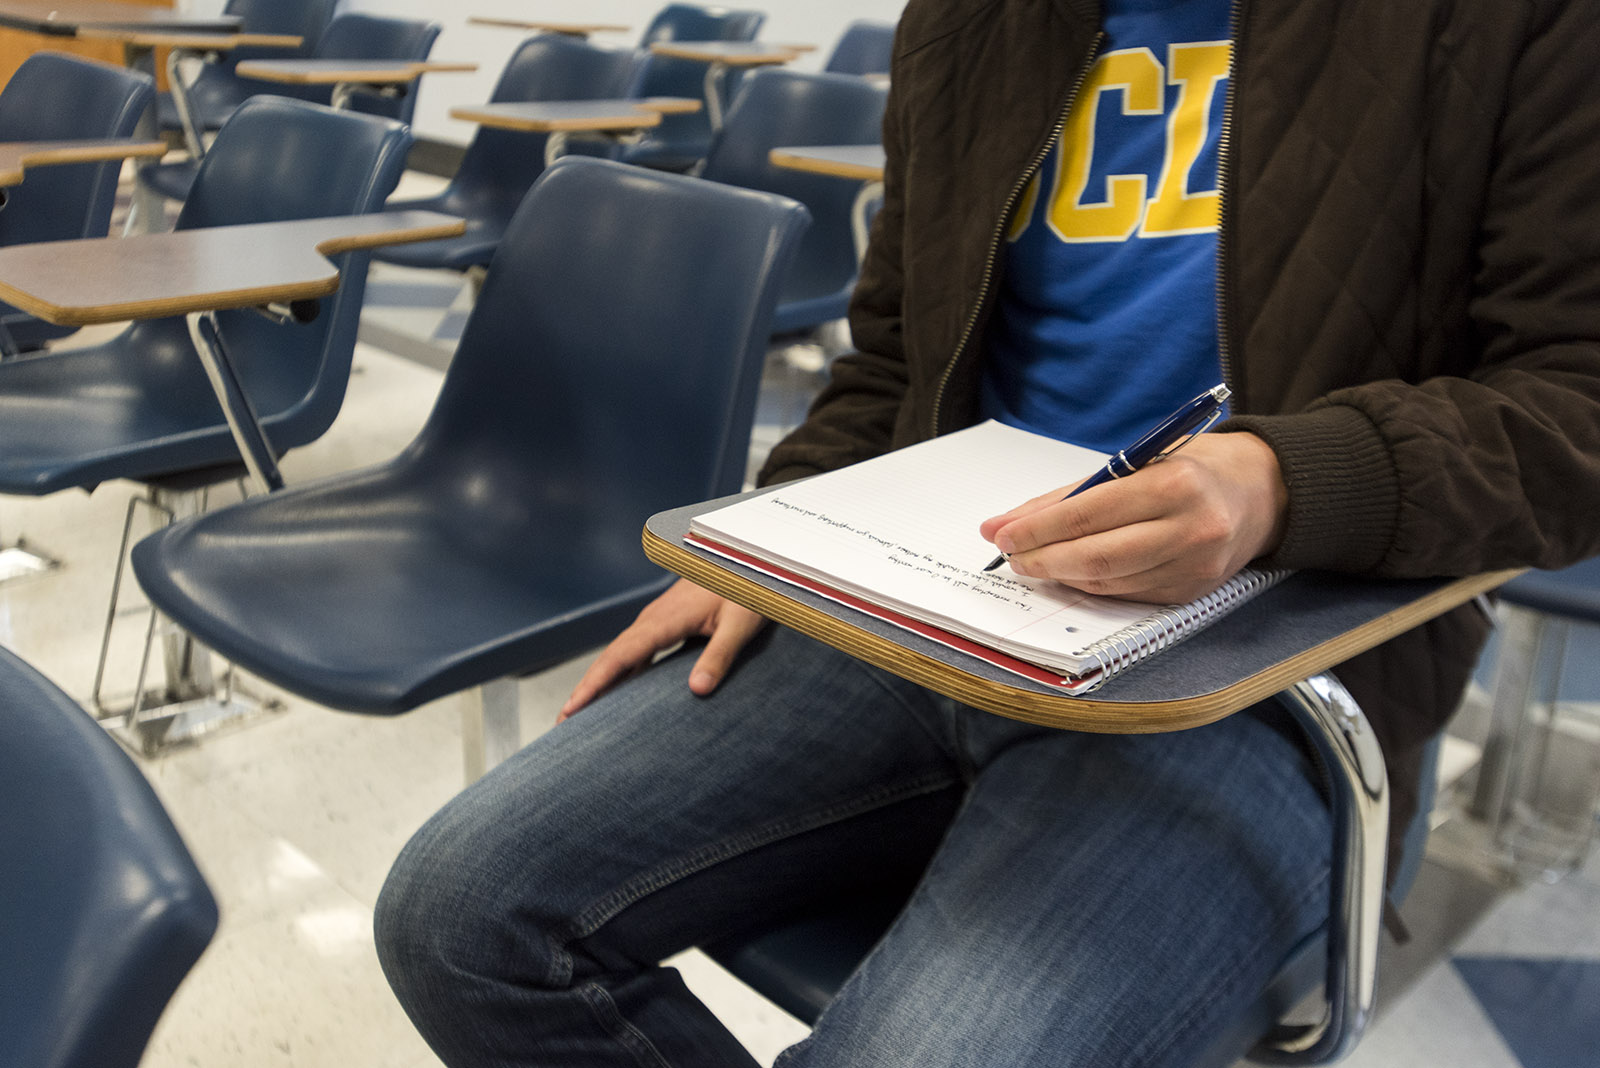 Kuhelika Ghosh: Left-handed students are hindered by lack of accommodating  desks - Daily Bruin